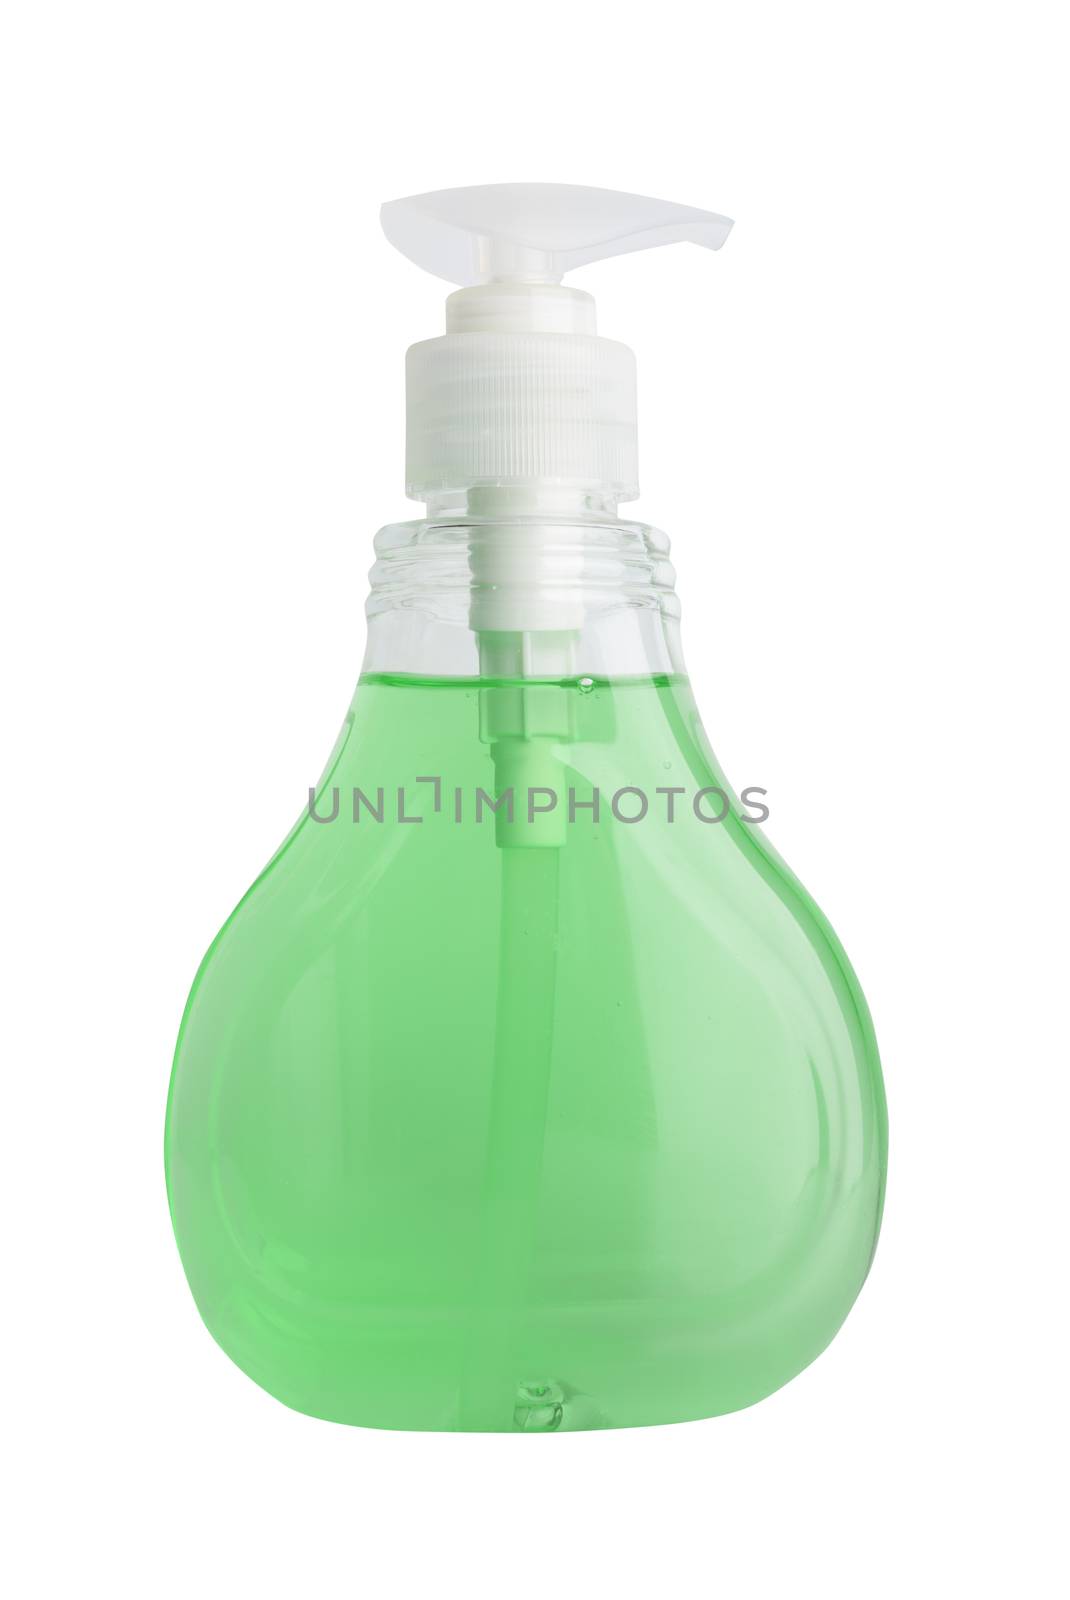 Green bottle of sanitizer or liquid soap for hand hygiene to protect from corona virus isolated over white background with clipping path